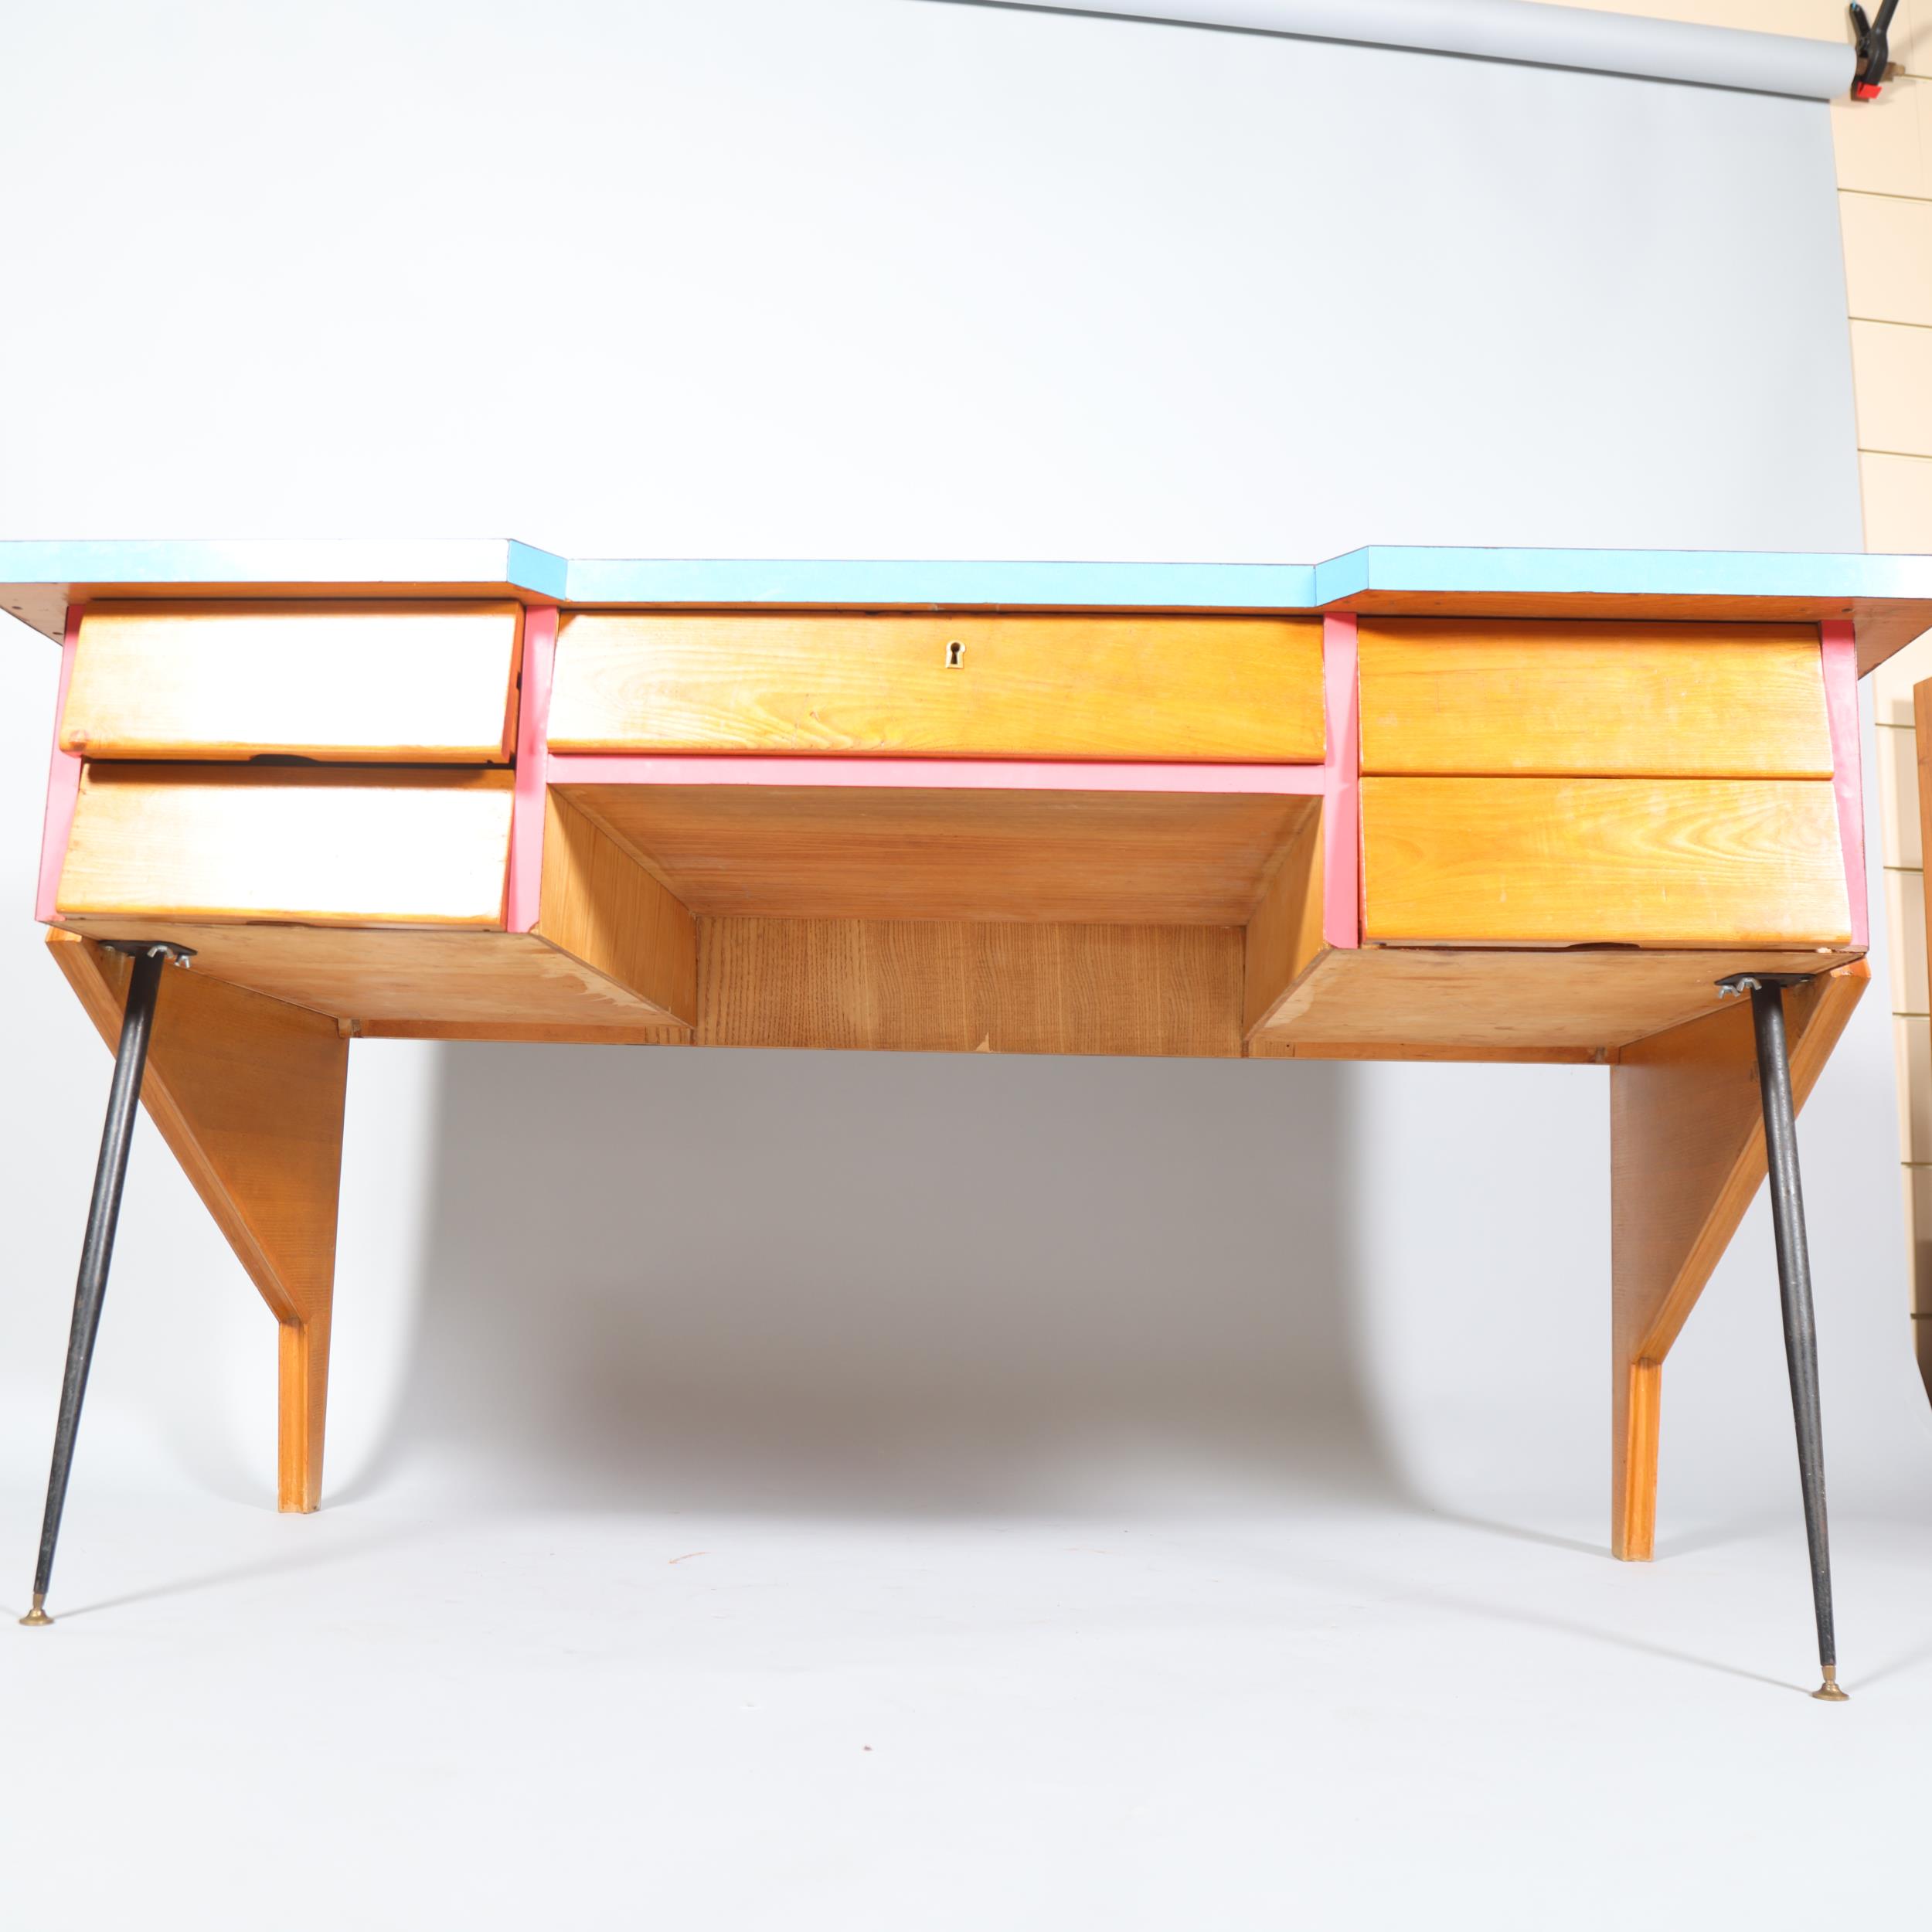 A mid 20th century Thonet desk, with beech ply body, pine fronted drawers with solid beech interior, - Image 6 of 7